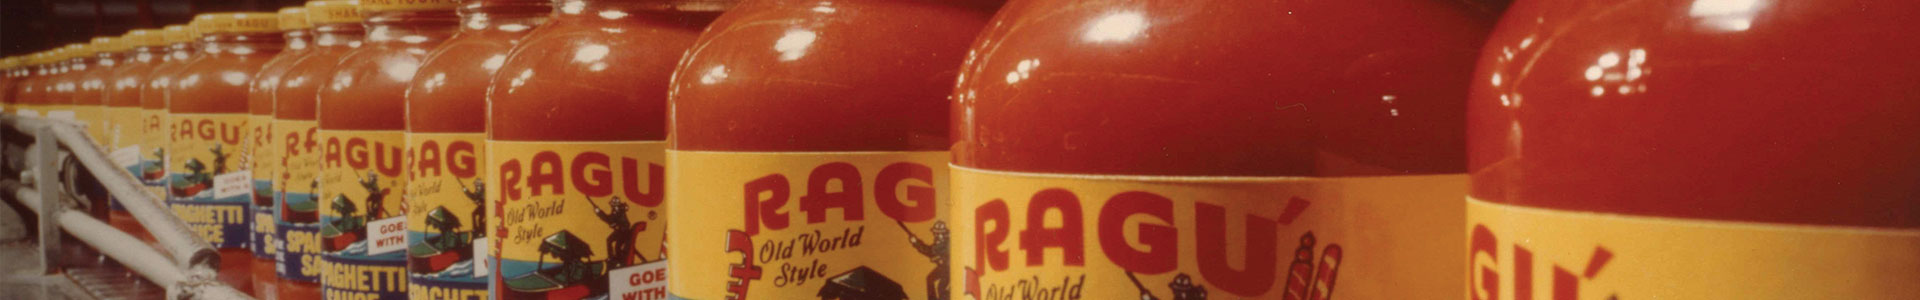 A product line up of vintage bottles of RAGÚ Old World Style spaghetti sauce